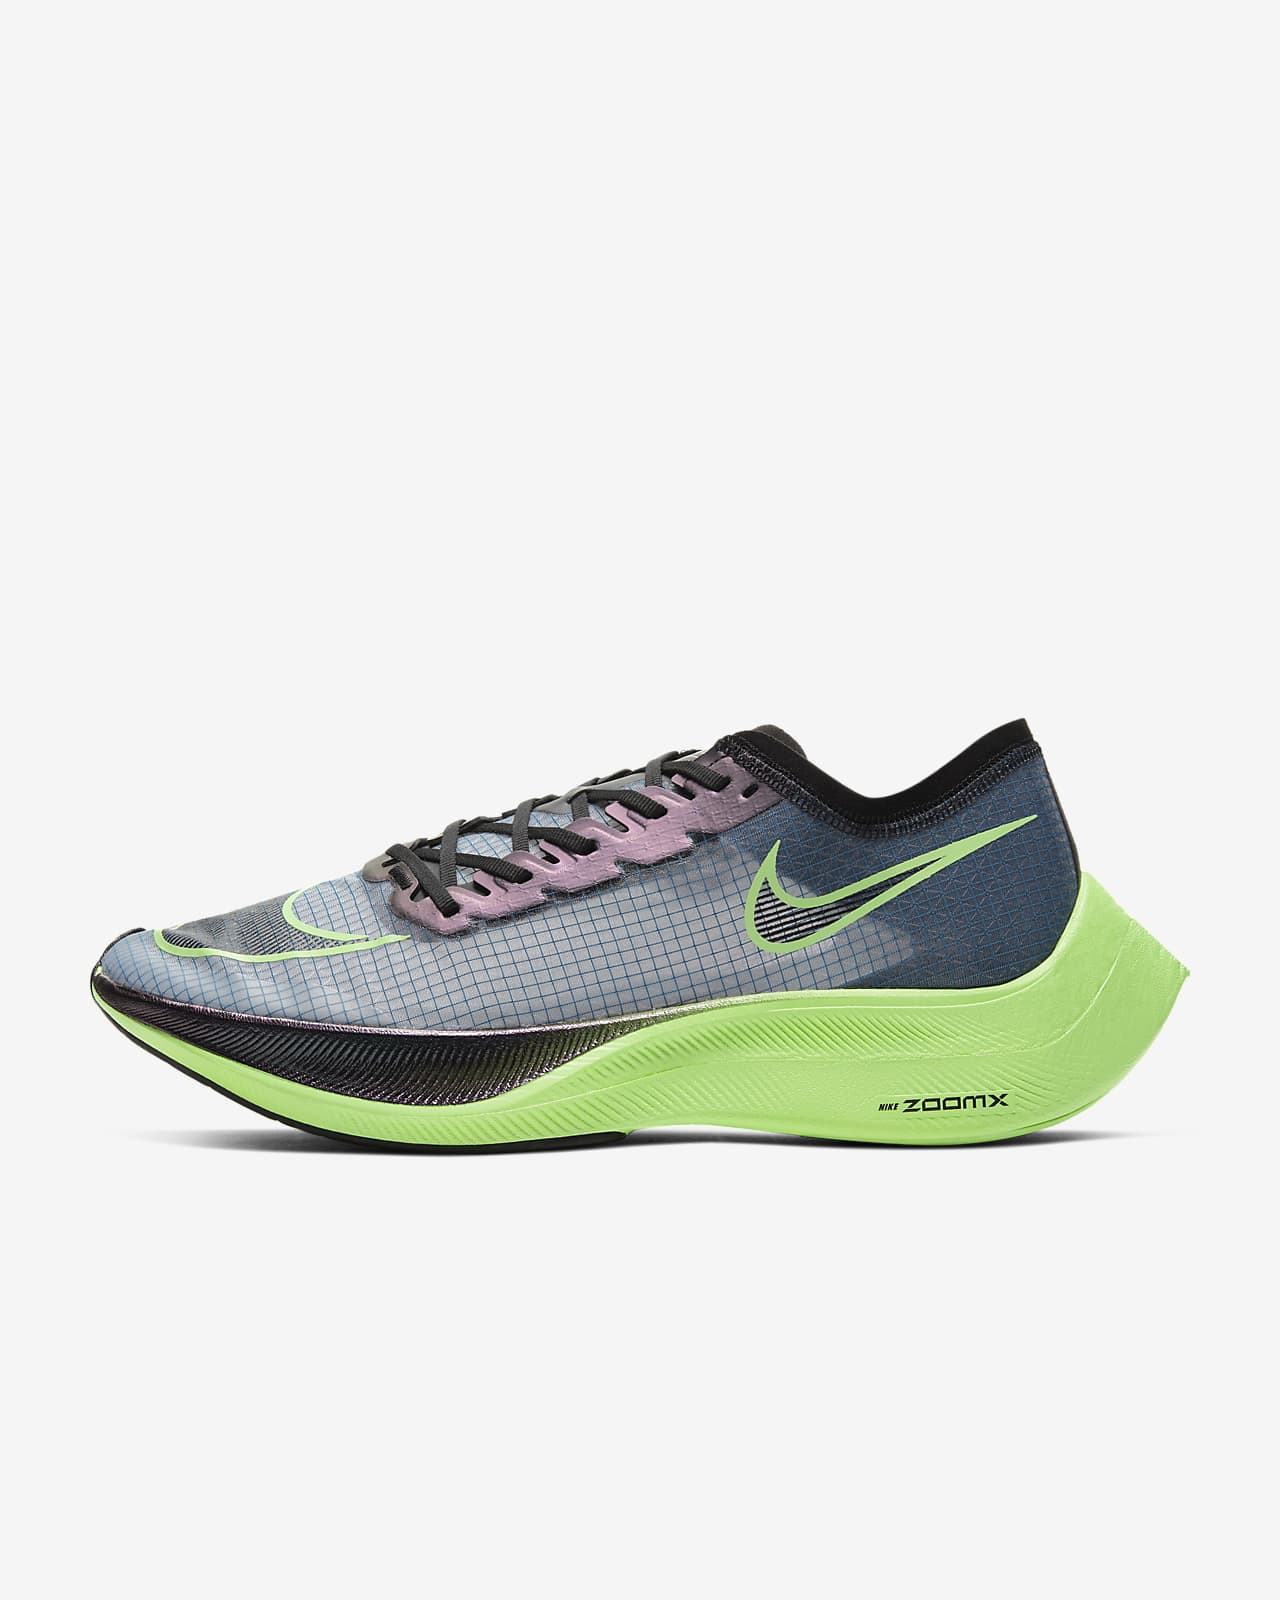 nike zoomx green running shoes